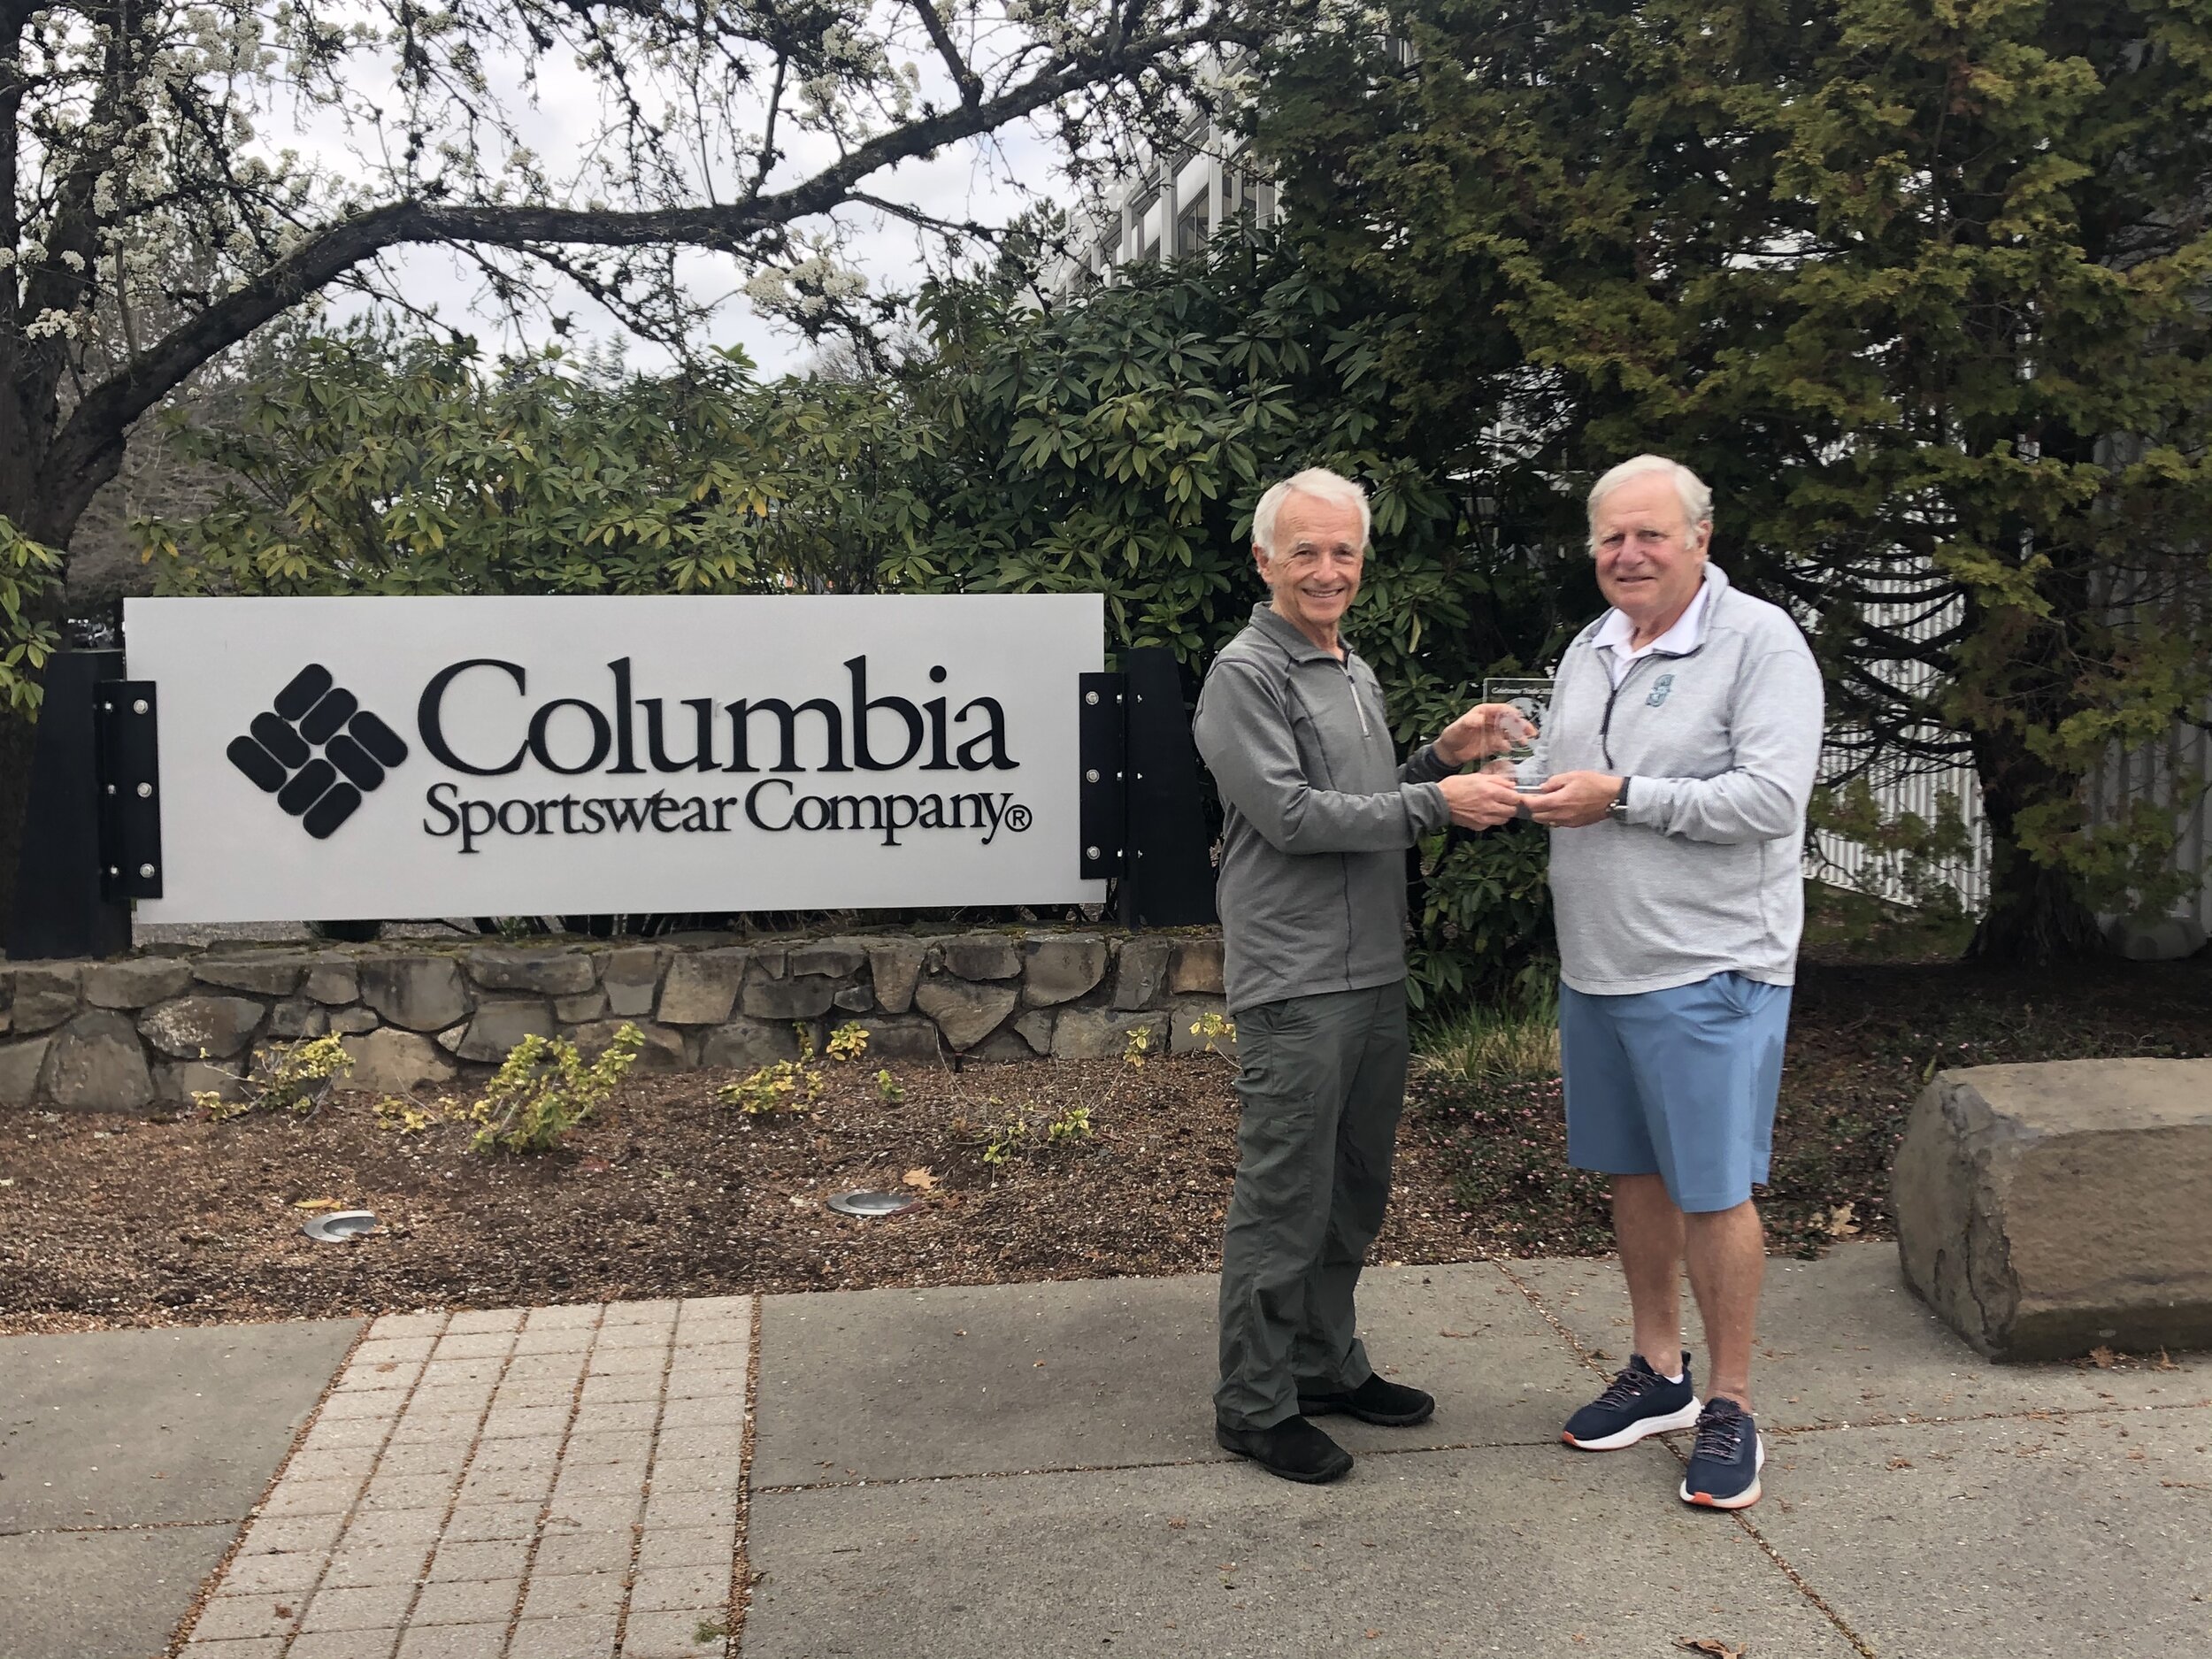  Randy Miller of the Oregon Consular Corps (L) presents the Celebrate Trade Award to Tim Boyle, Chairman of Columbia Sportswear. 